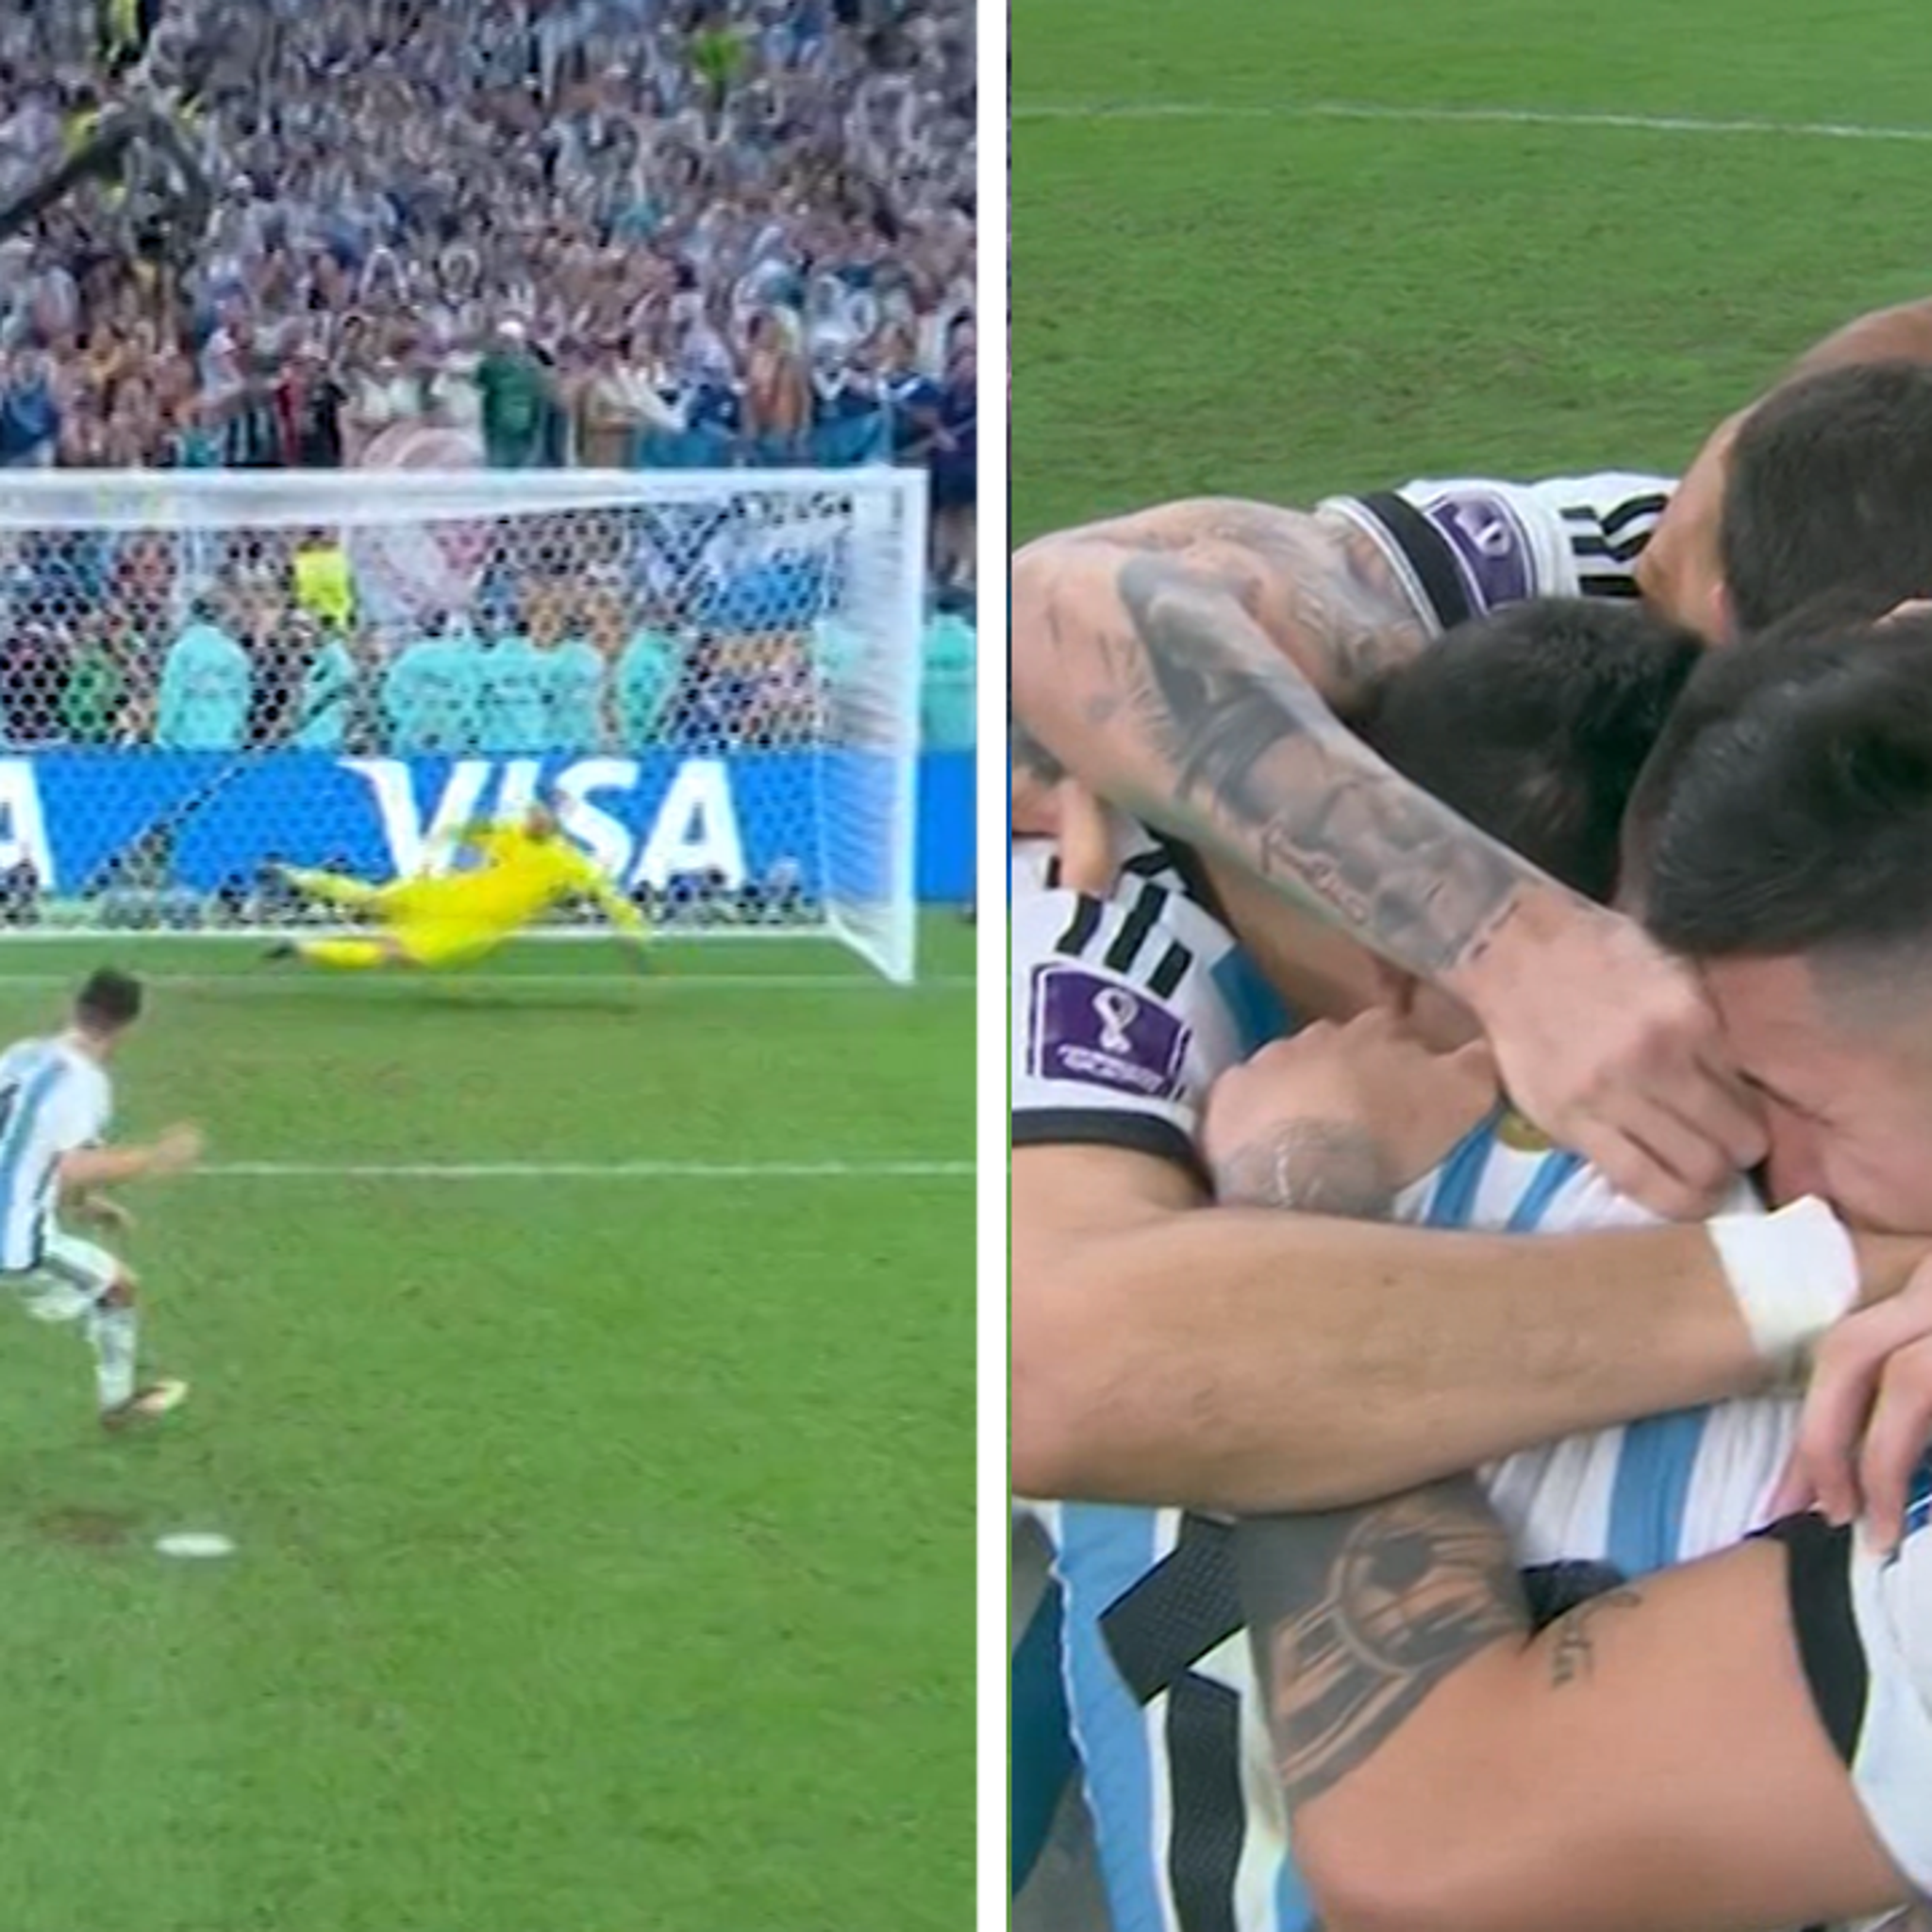 Argentina beats France on penalty kicks, winning World Cup for